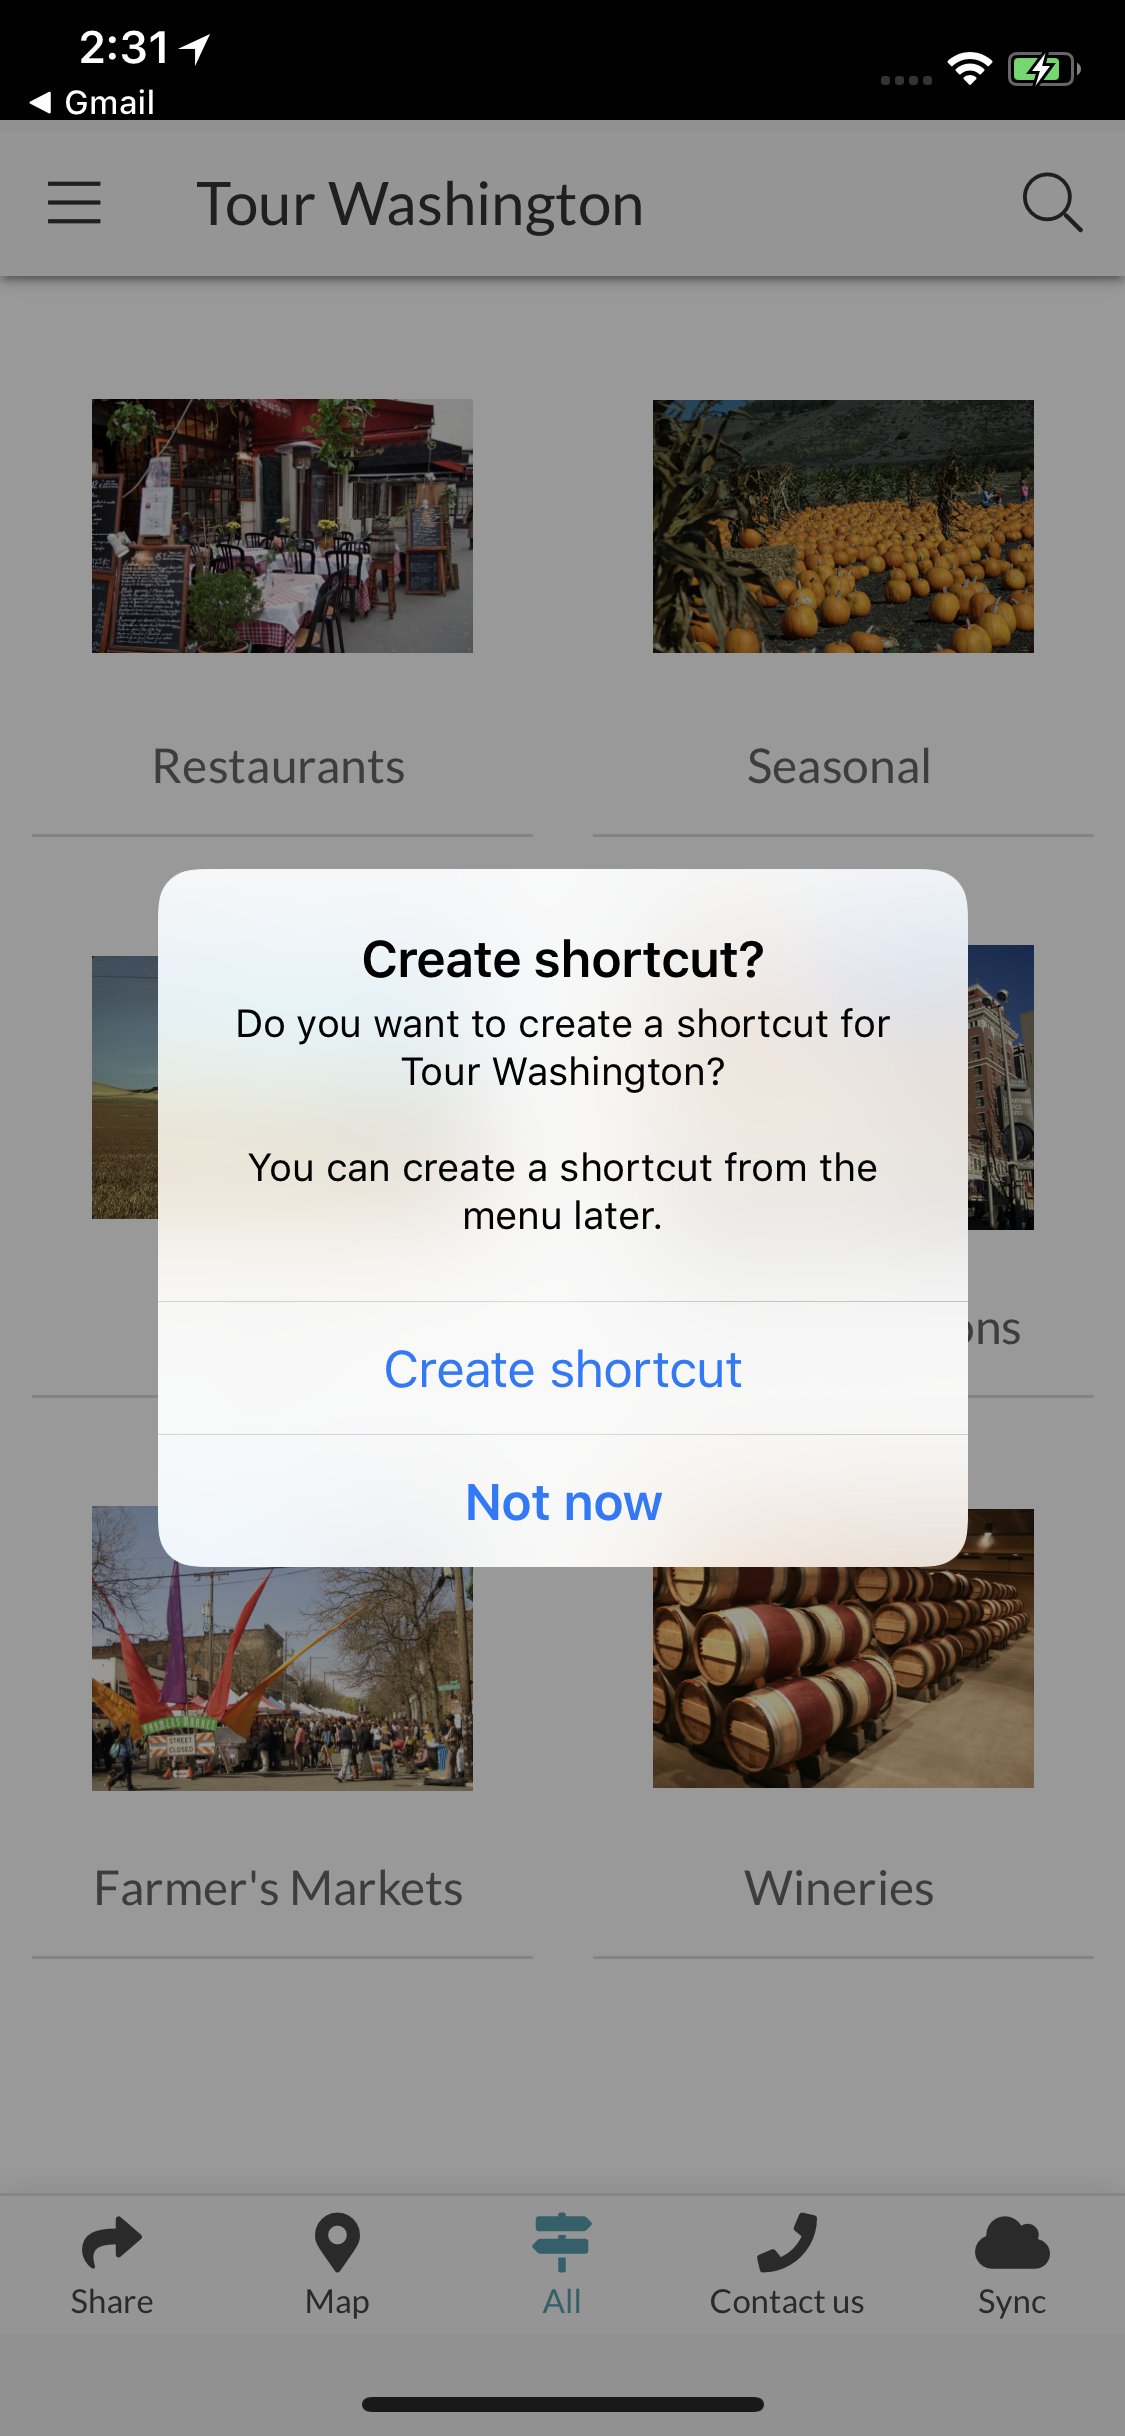 Dialog prompting to create a shortcut